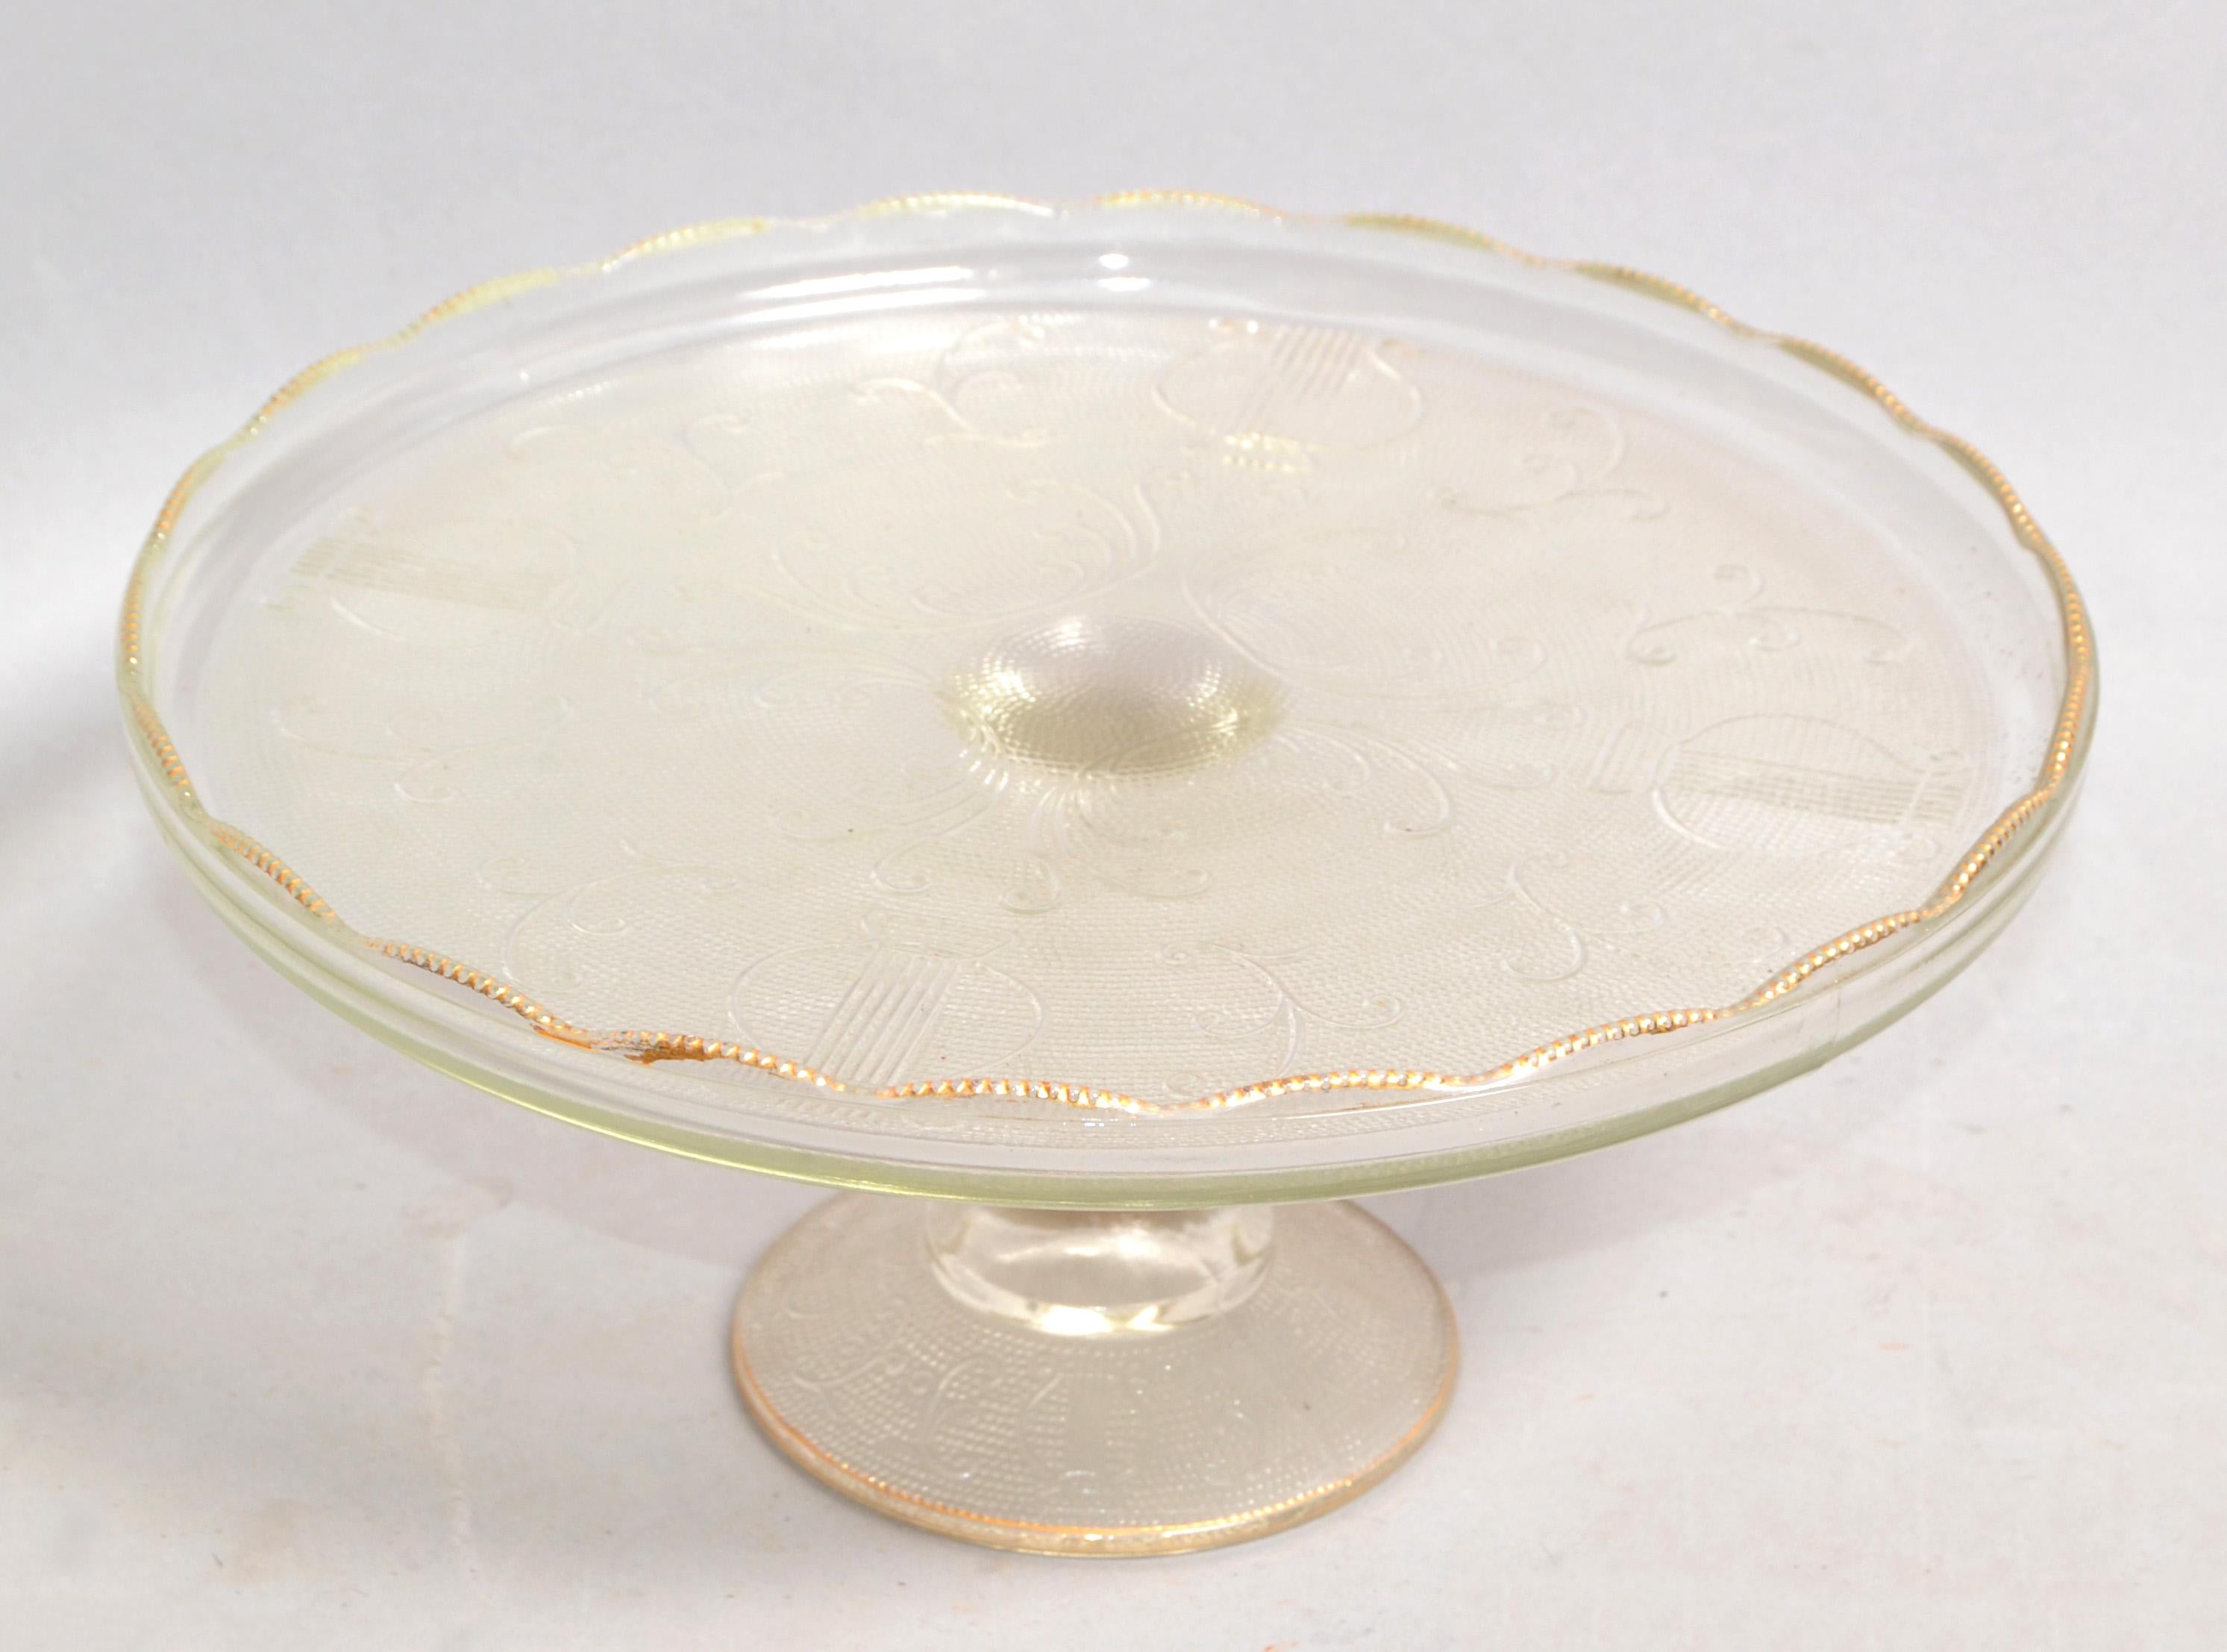 Art Deco Crystal Gold Ruffled Edge Pedestal Cake Stand Musical Instruments 1950s For Sale 5